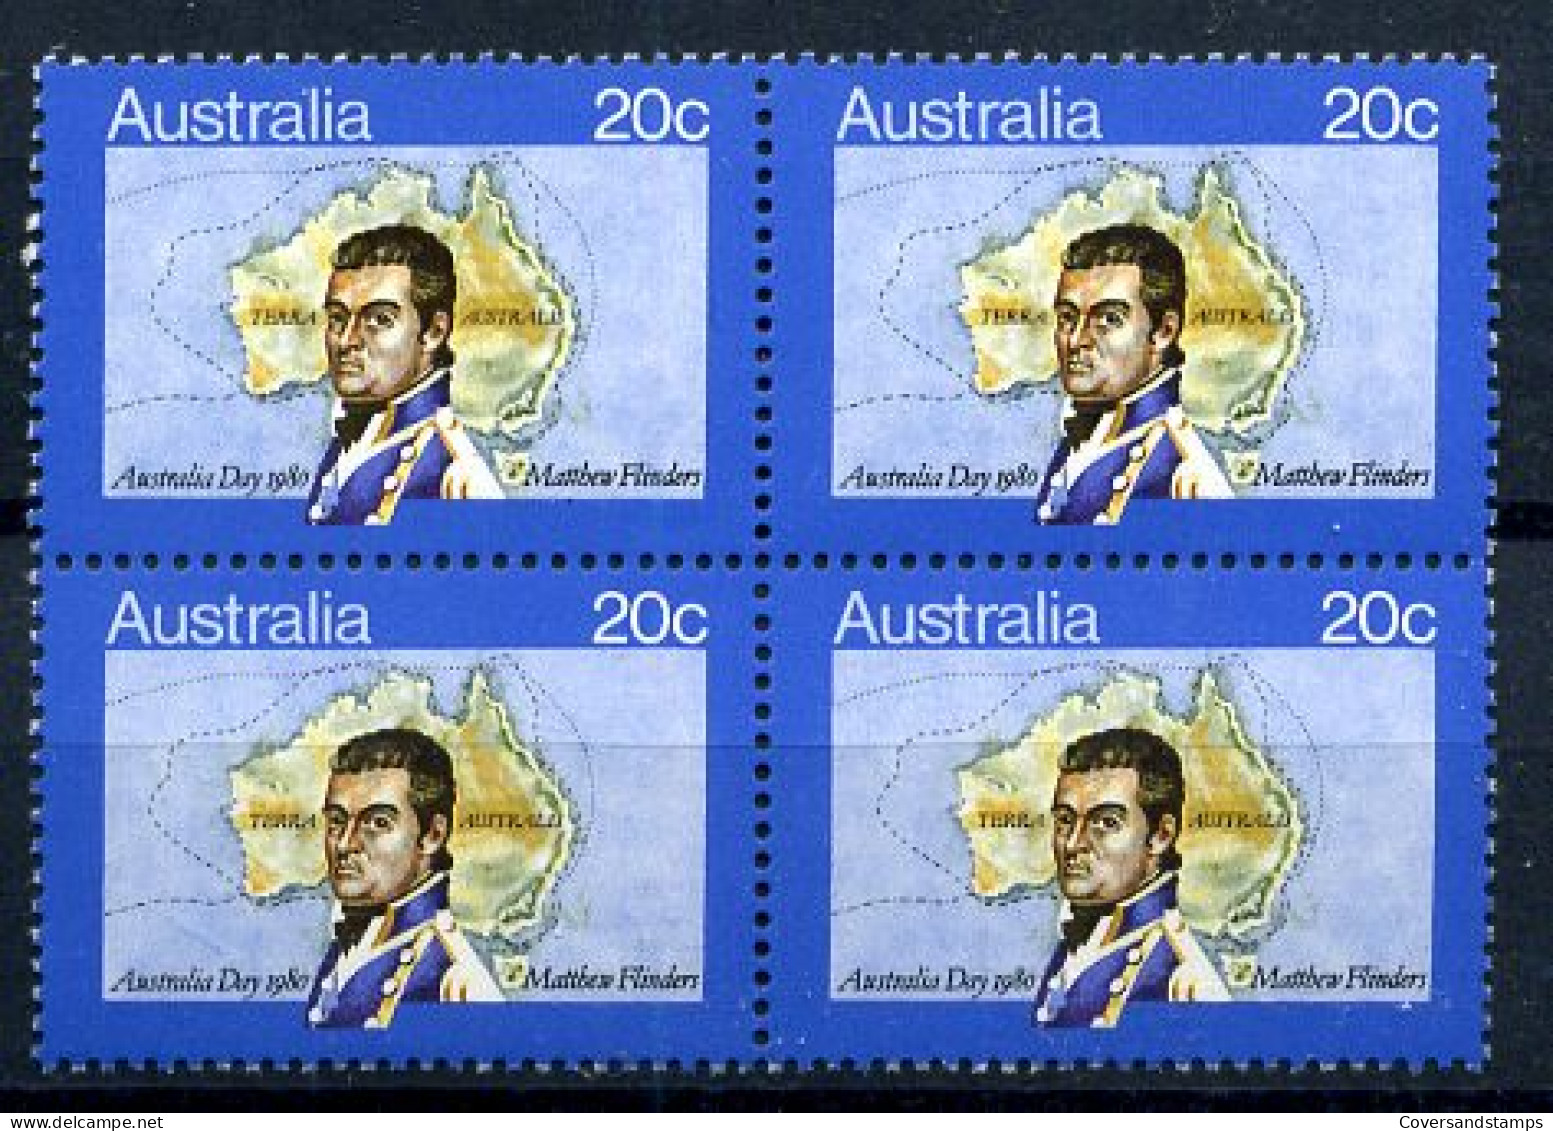 Australia - Sc726 In Block Of 4 - MNH - Mint Stamps